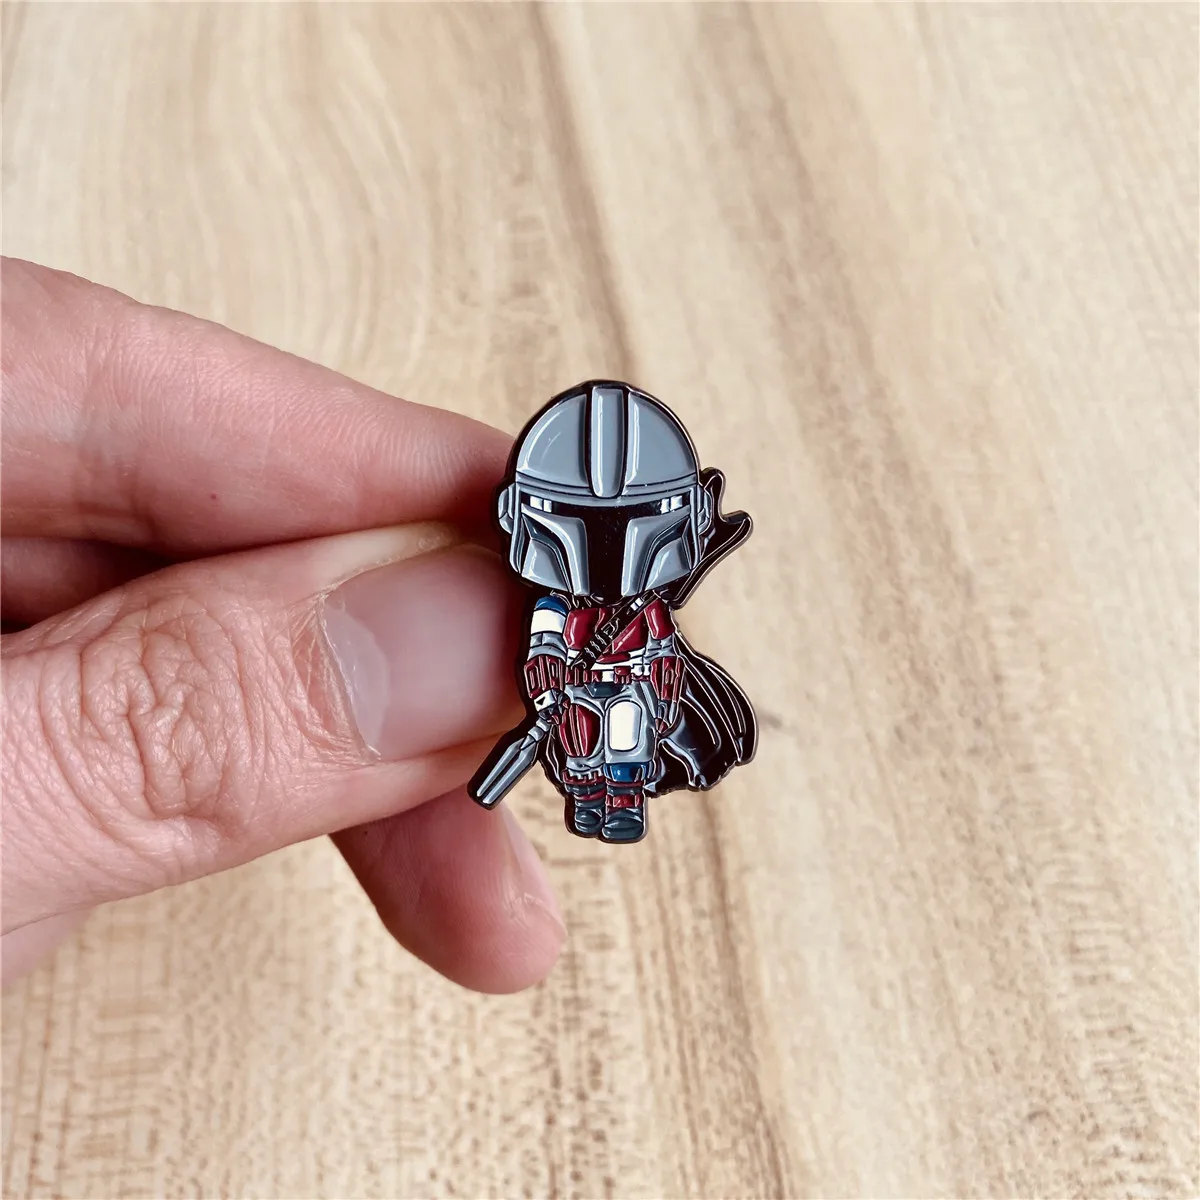 Classic Movie Brooch Mandalorian Enamel Lapel Pin Badge Pins Hats Clothes Backpack Decoration Jewelry Accessories Gifts 1